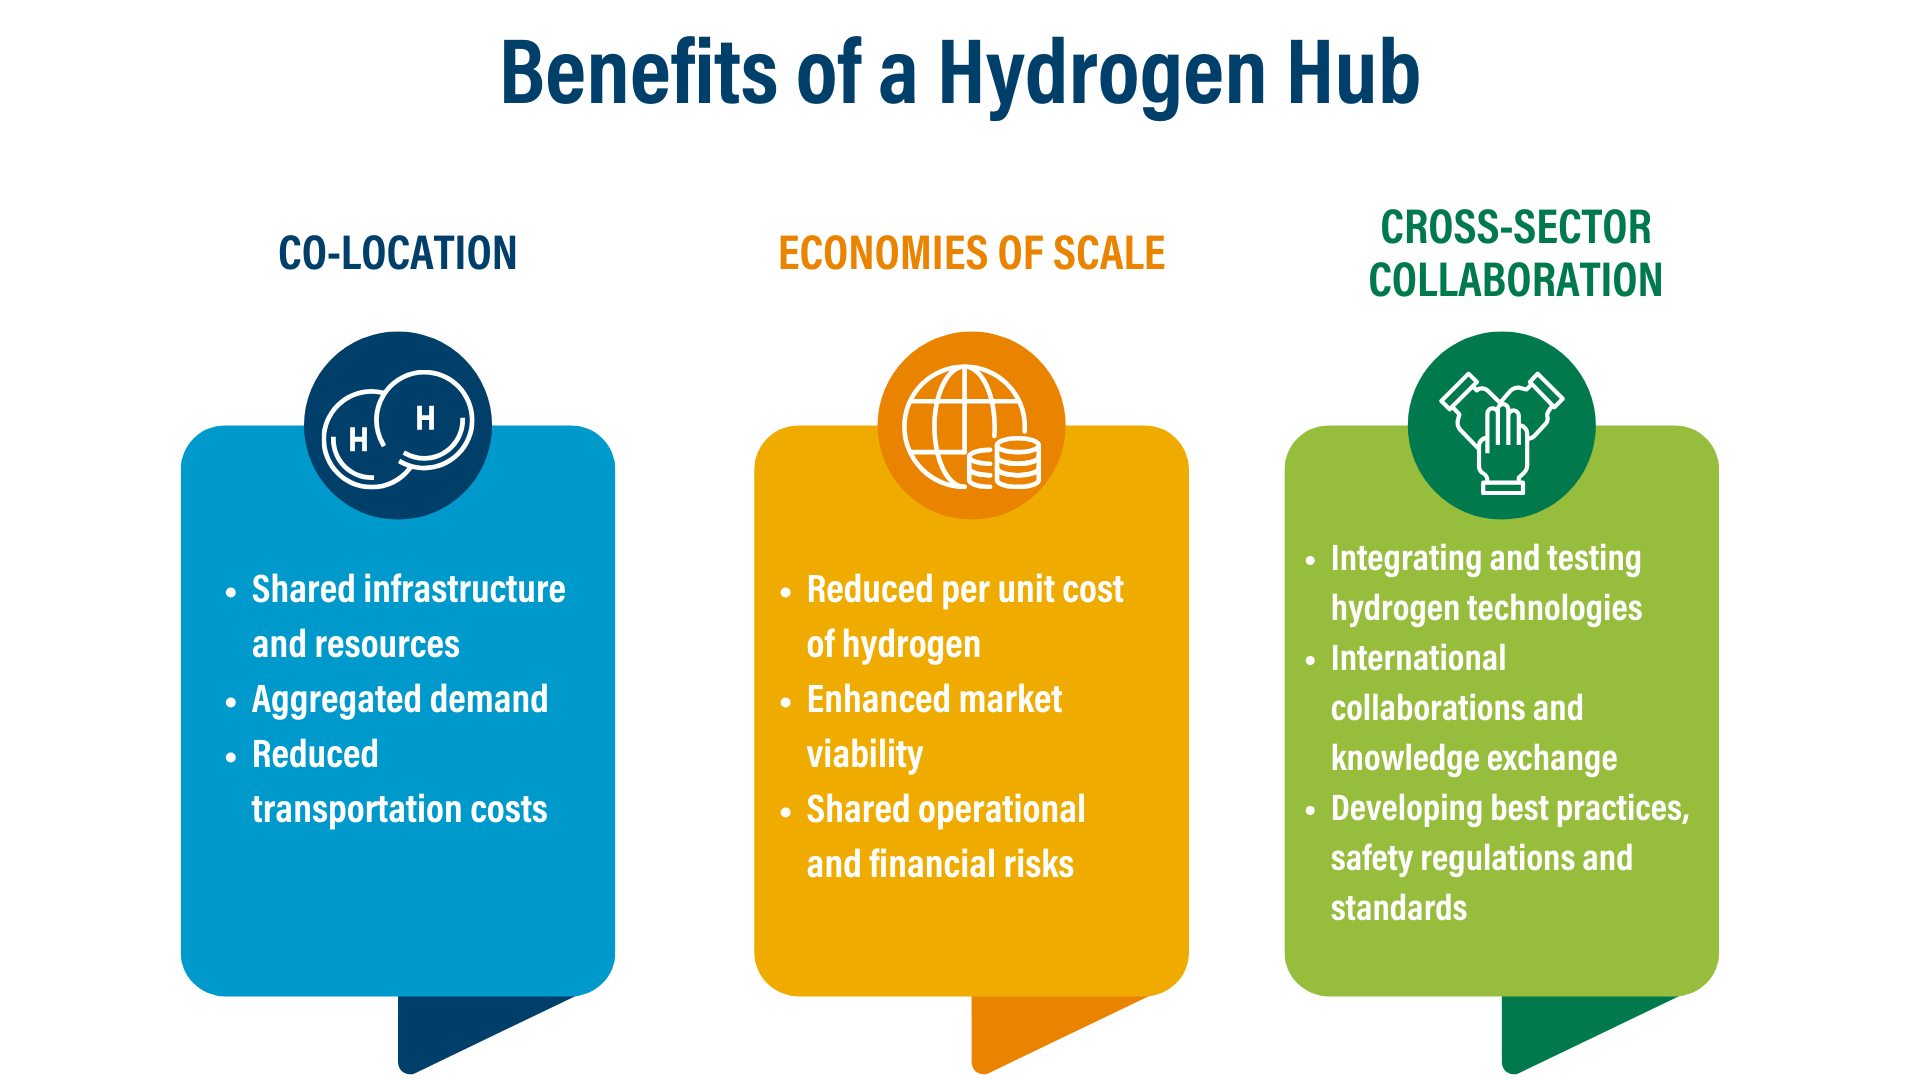 Benefits of a hydrogen hub. Infographic by Rhea Grover/WRI India.